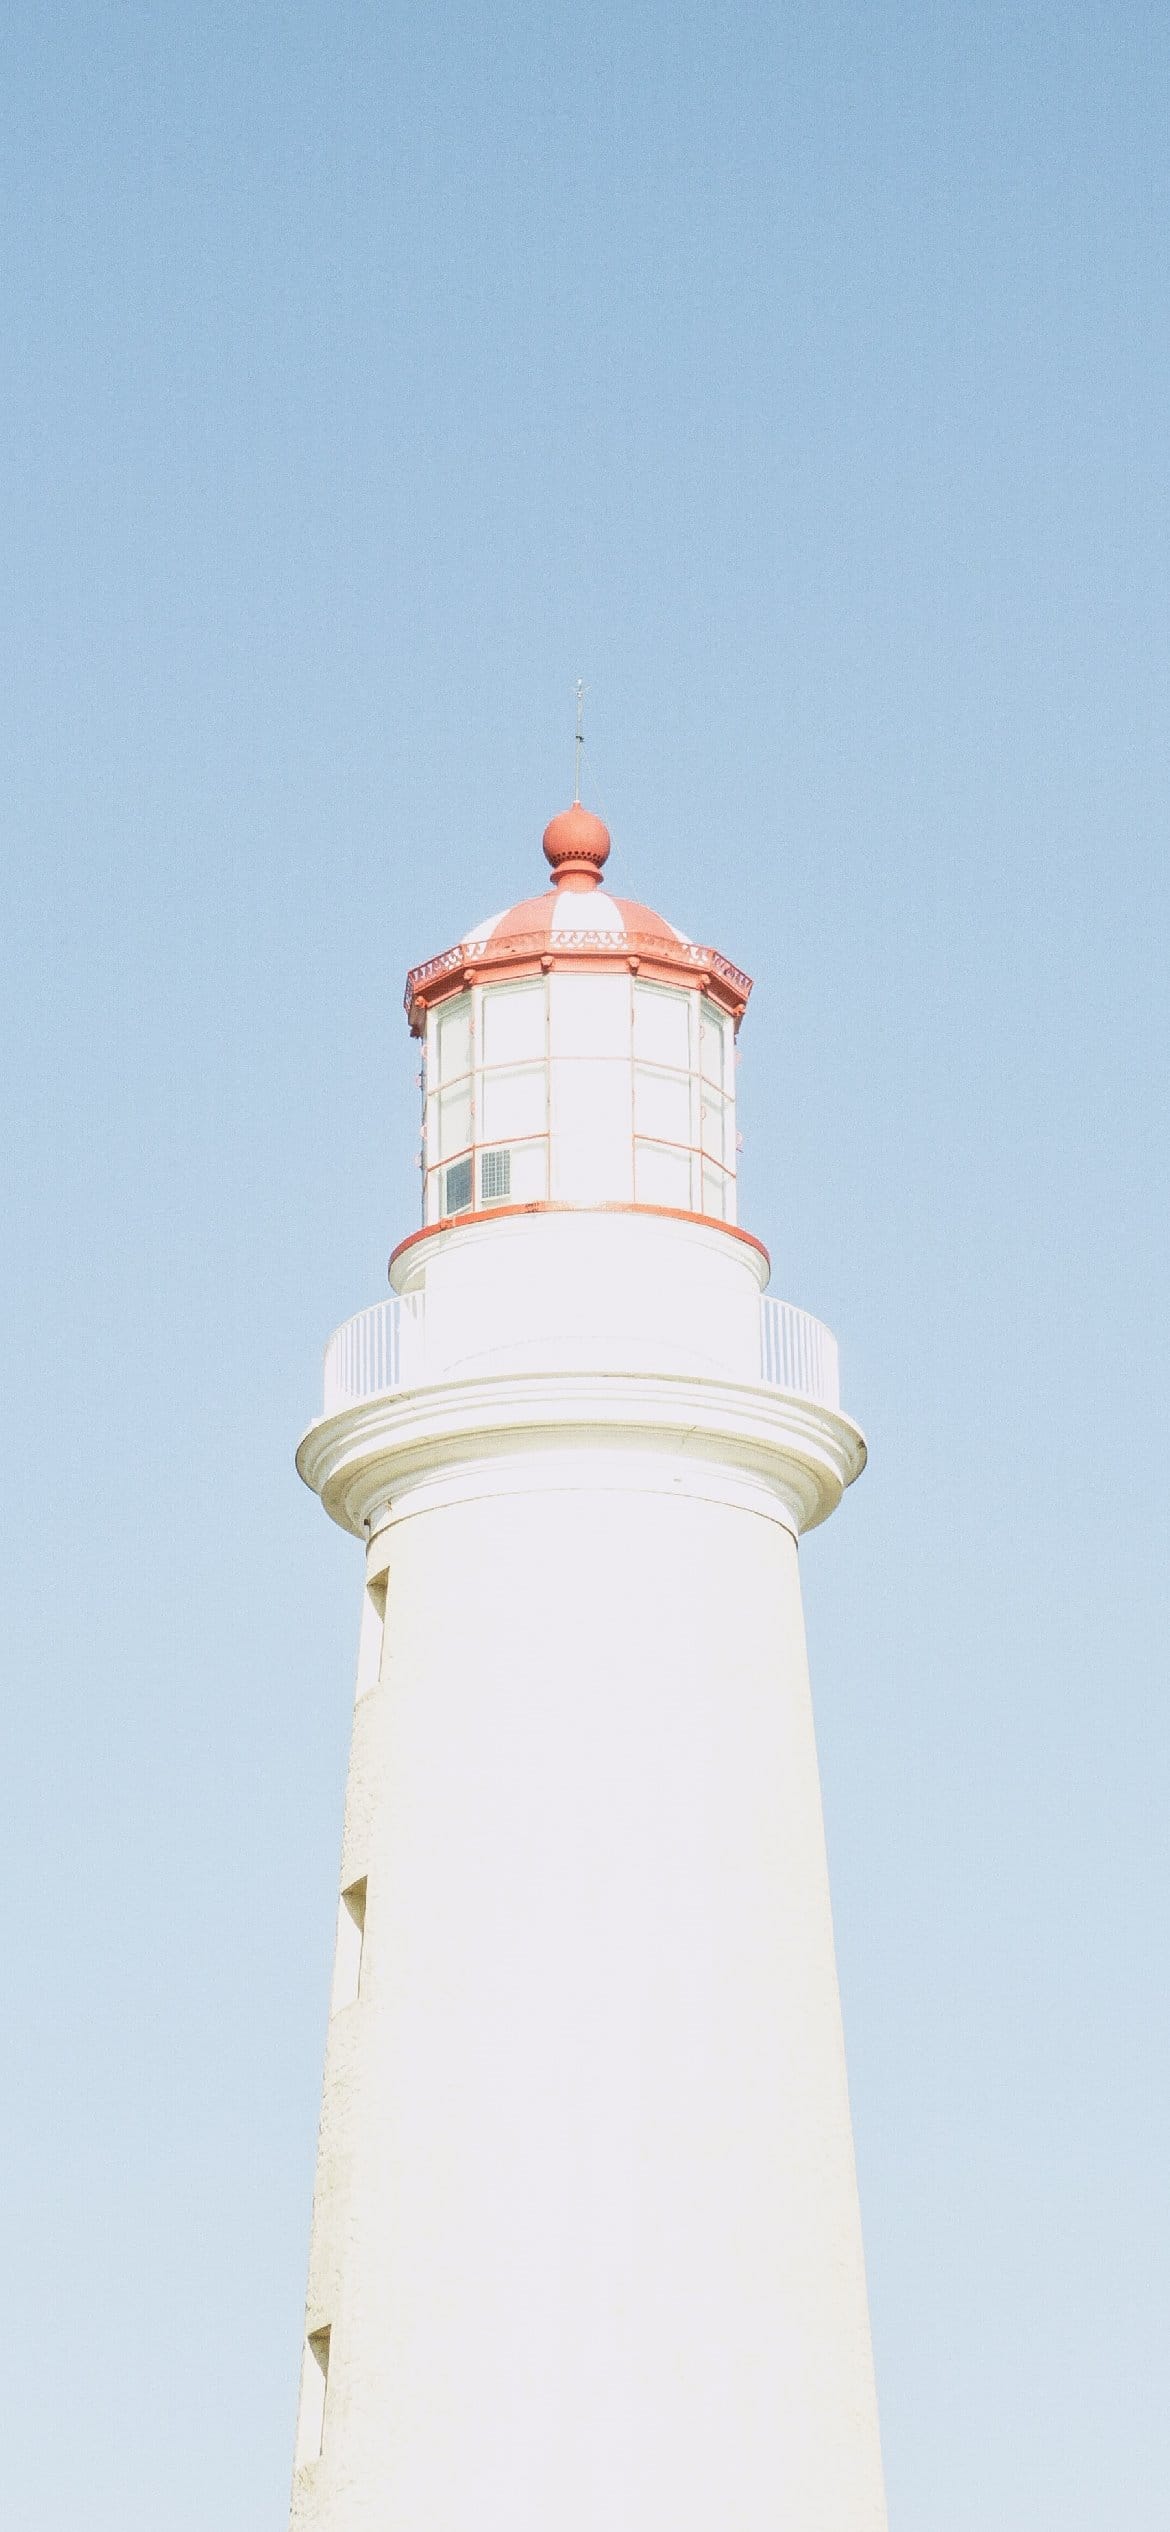 A lighthouse with red and white stripes on it - Light blue